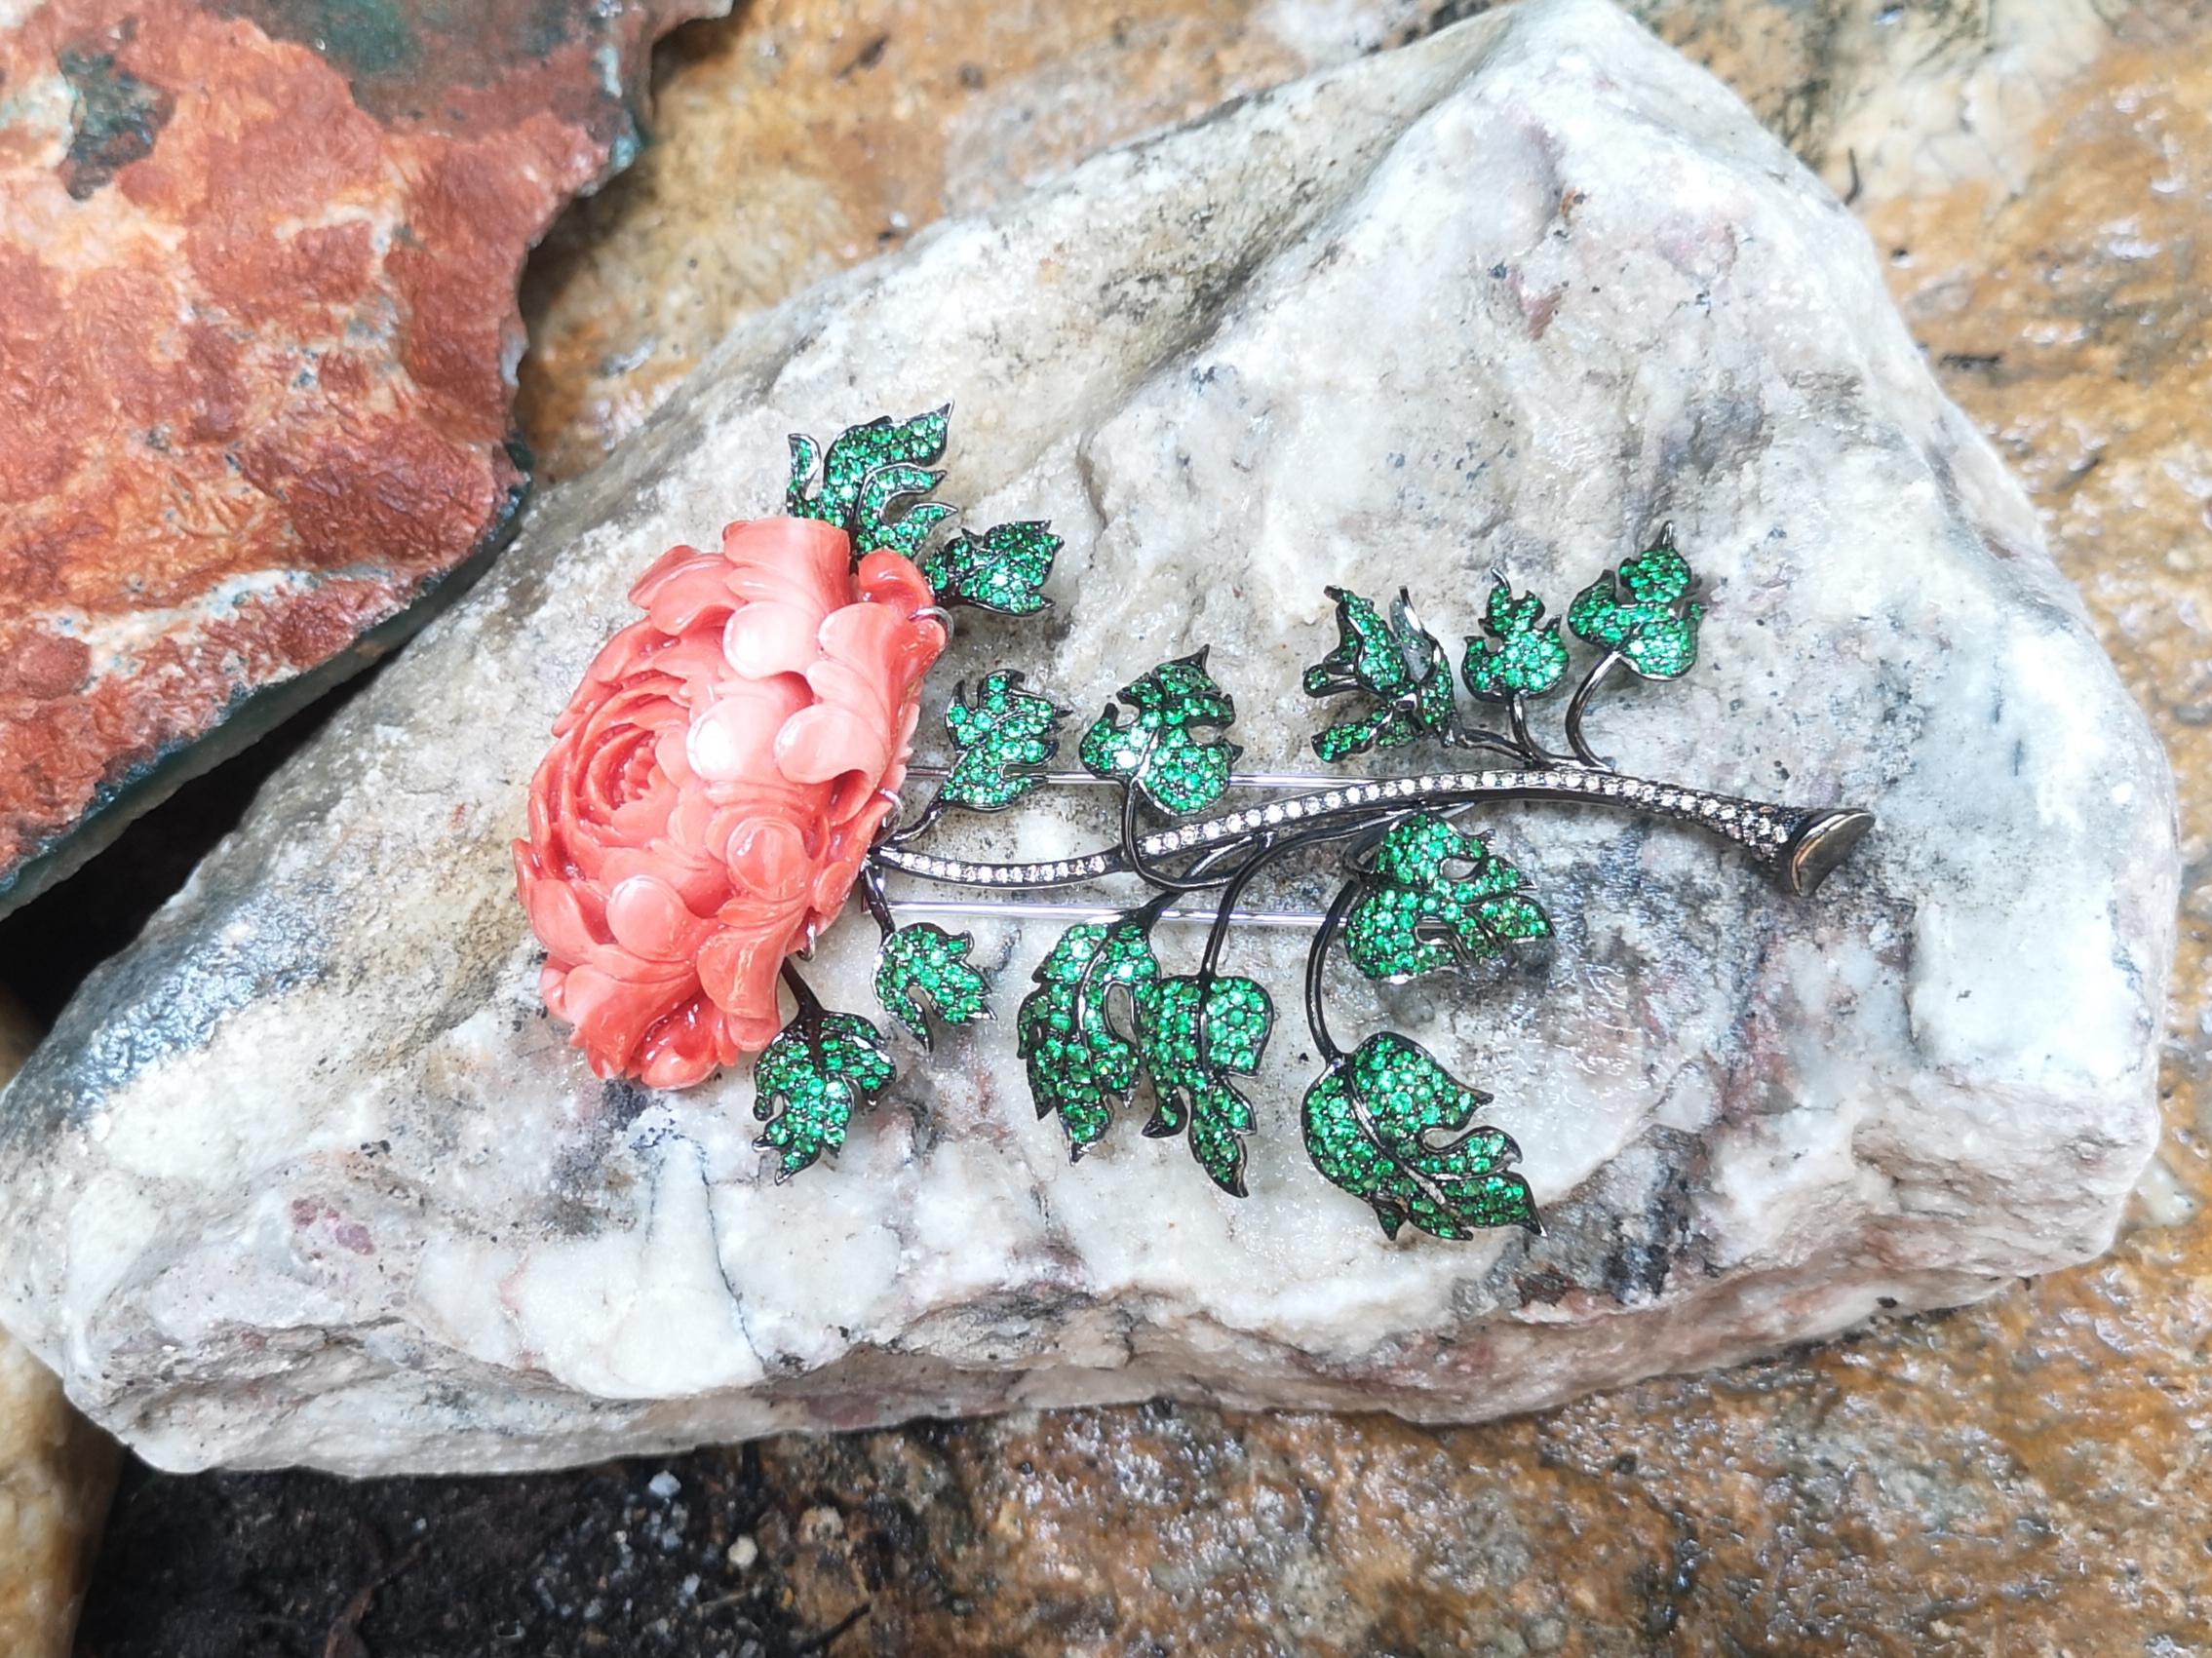 Coral 112.50 carats with Tsavorite 8.99 carats and Brown Diamond 0.88 carat Brooch set in 18 Karat White Gold Settings

Width:  7.0 cm 
Length: 11.5 cm
Total Weight: 73.58 grams

